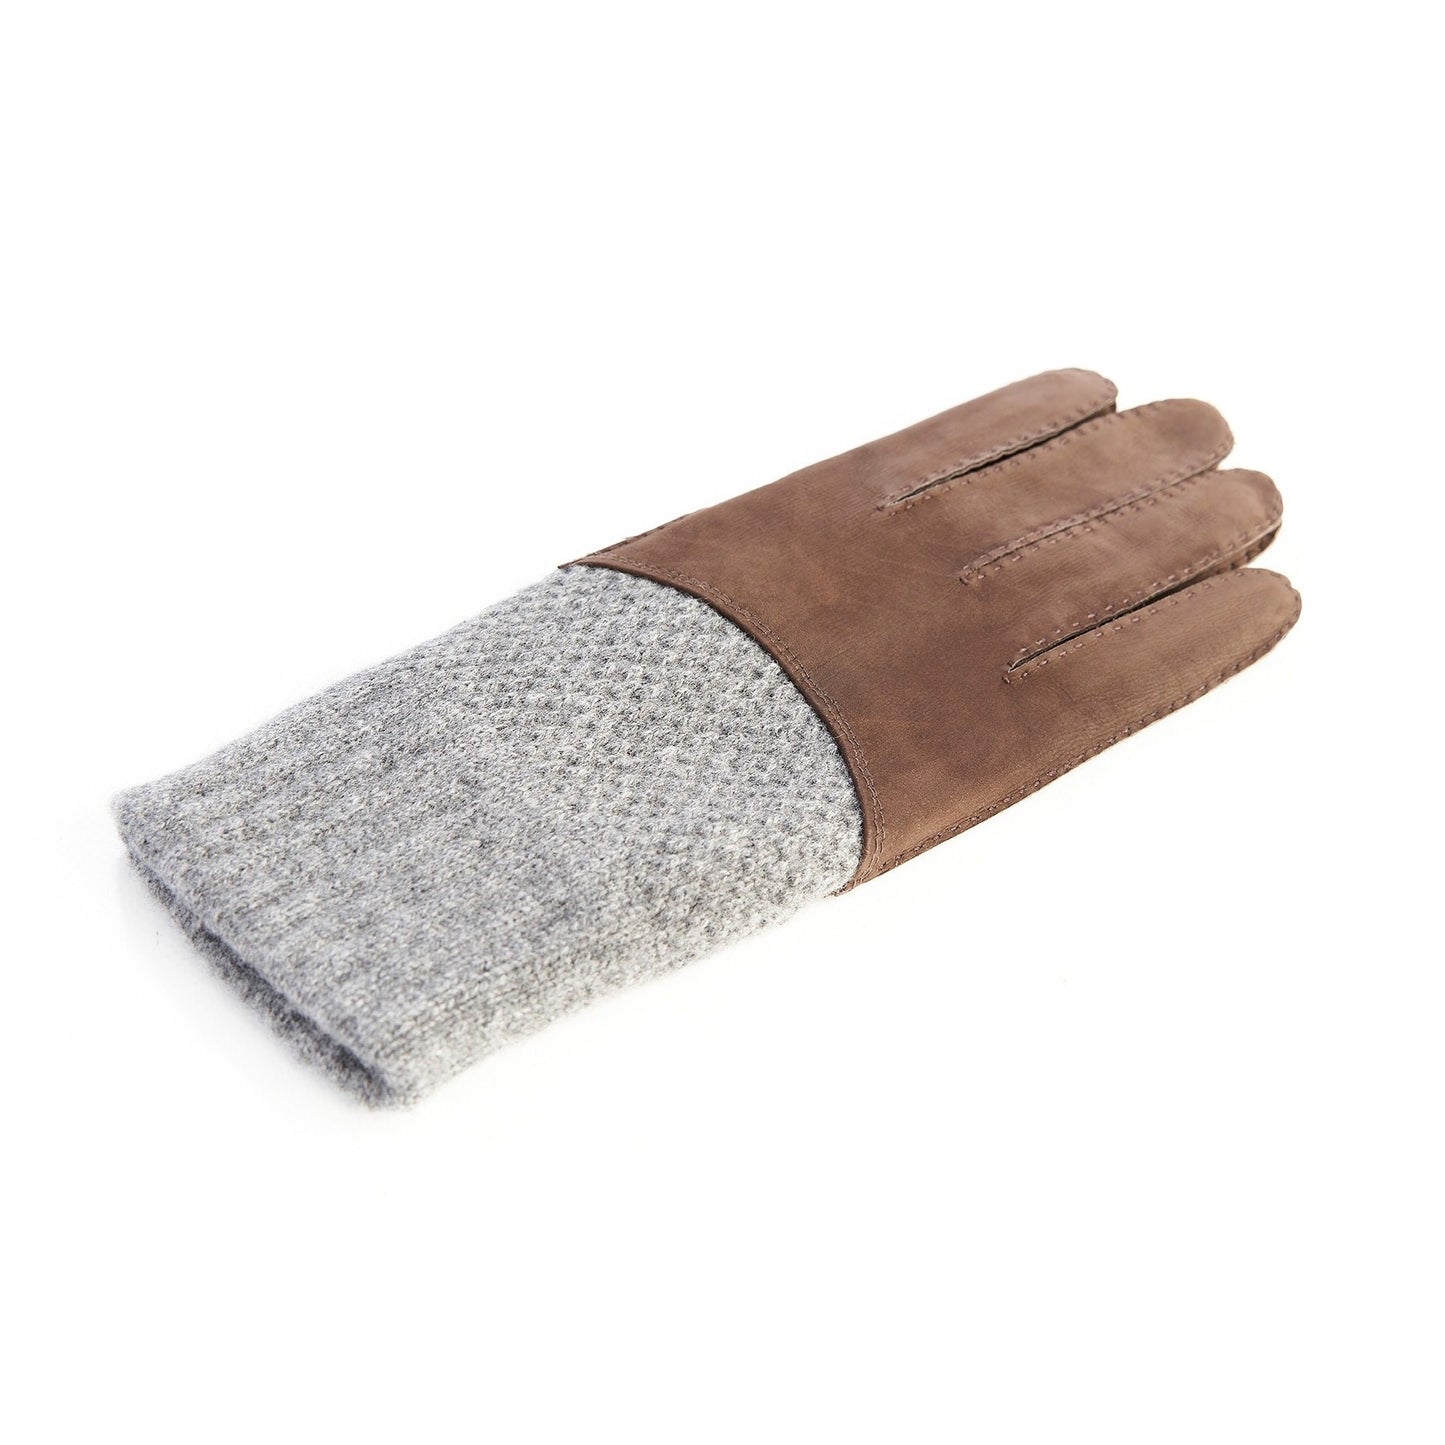 Men's hand-stitched nubuk gloves in color brown with grey cashmere top and lining